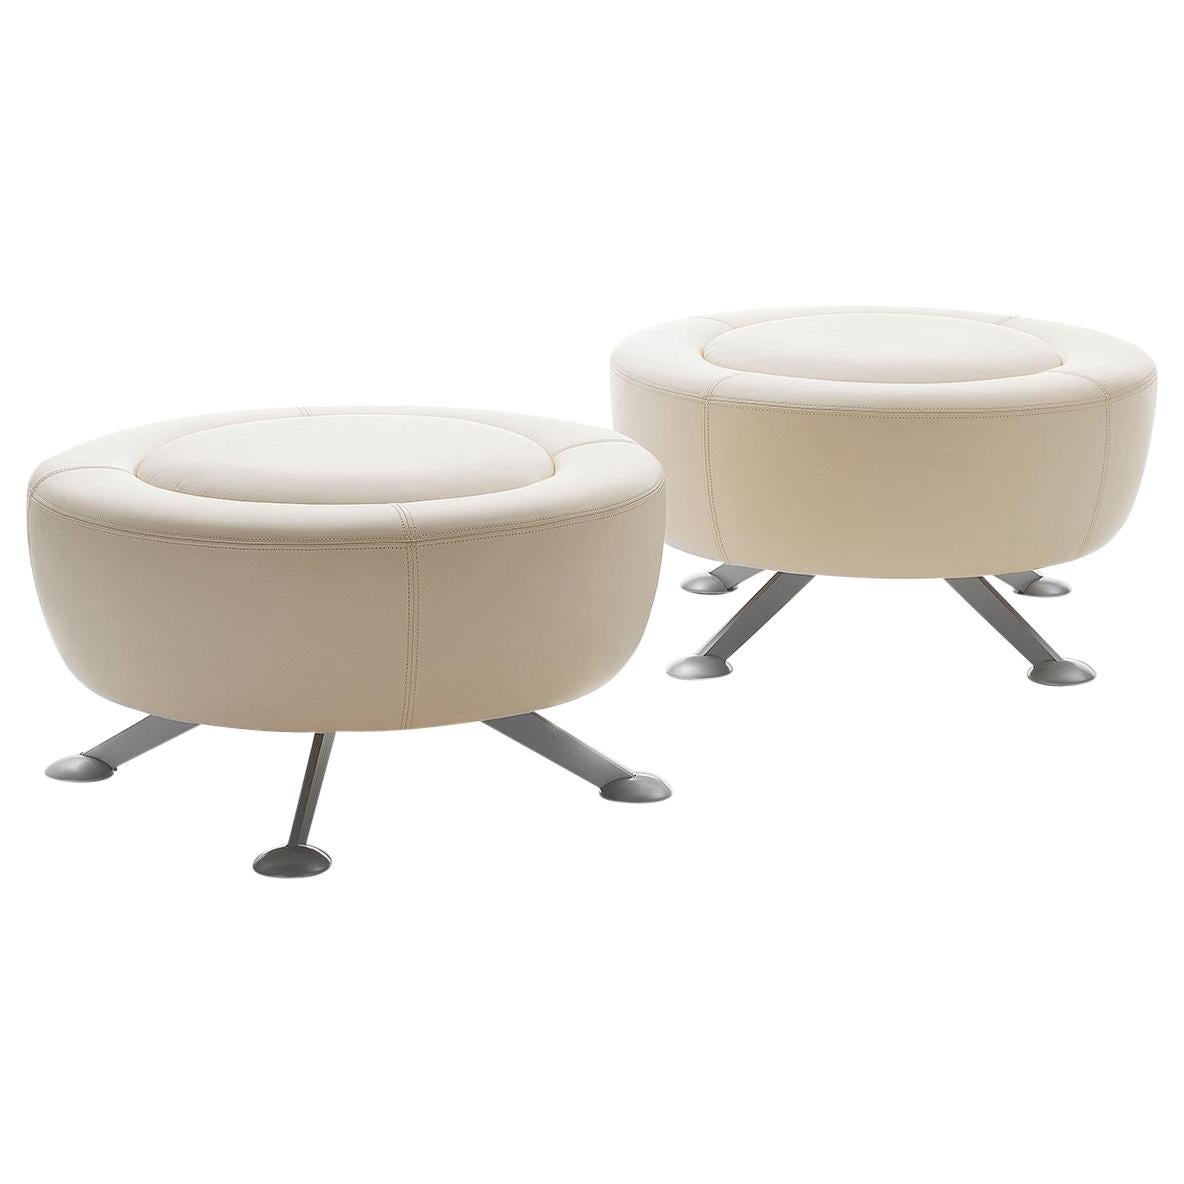 De Sede DS-164 Stool in Off White Upholstery by Hugo de Ruiter For Sale